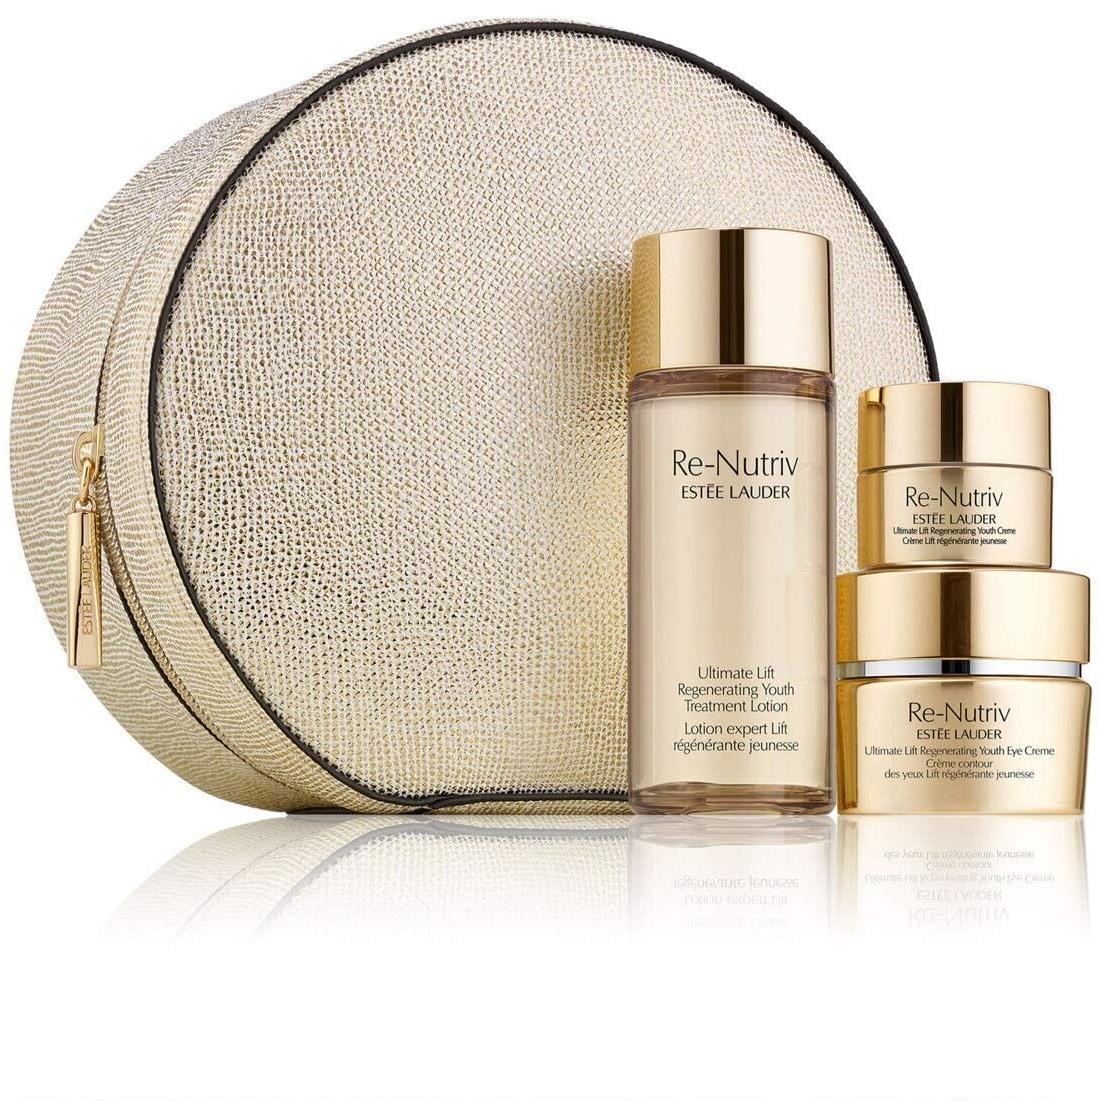 Estee Lauder Re-nutriv Ultimate Lift Regenerating Youth Collection For Eyes